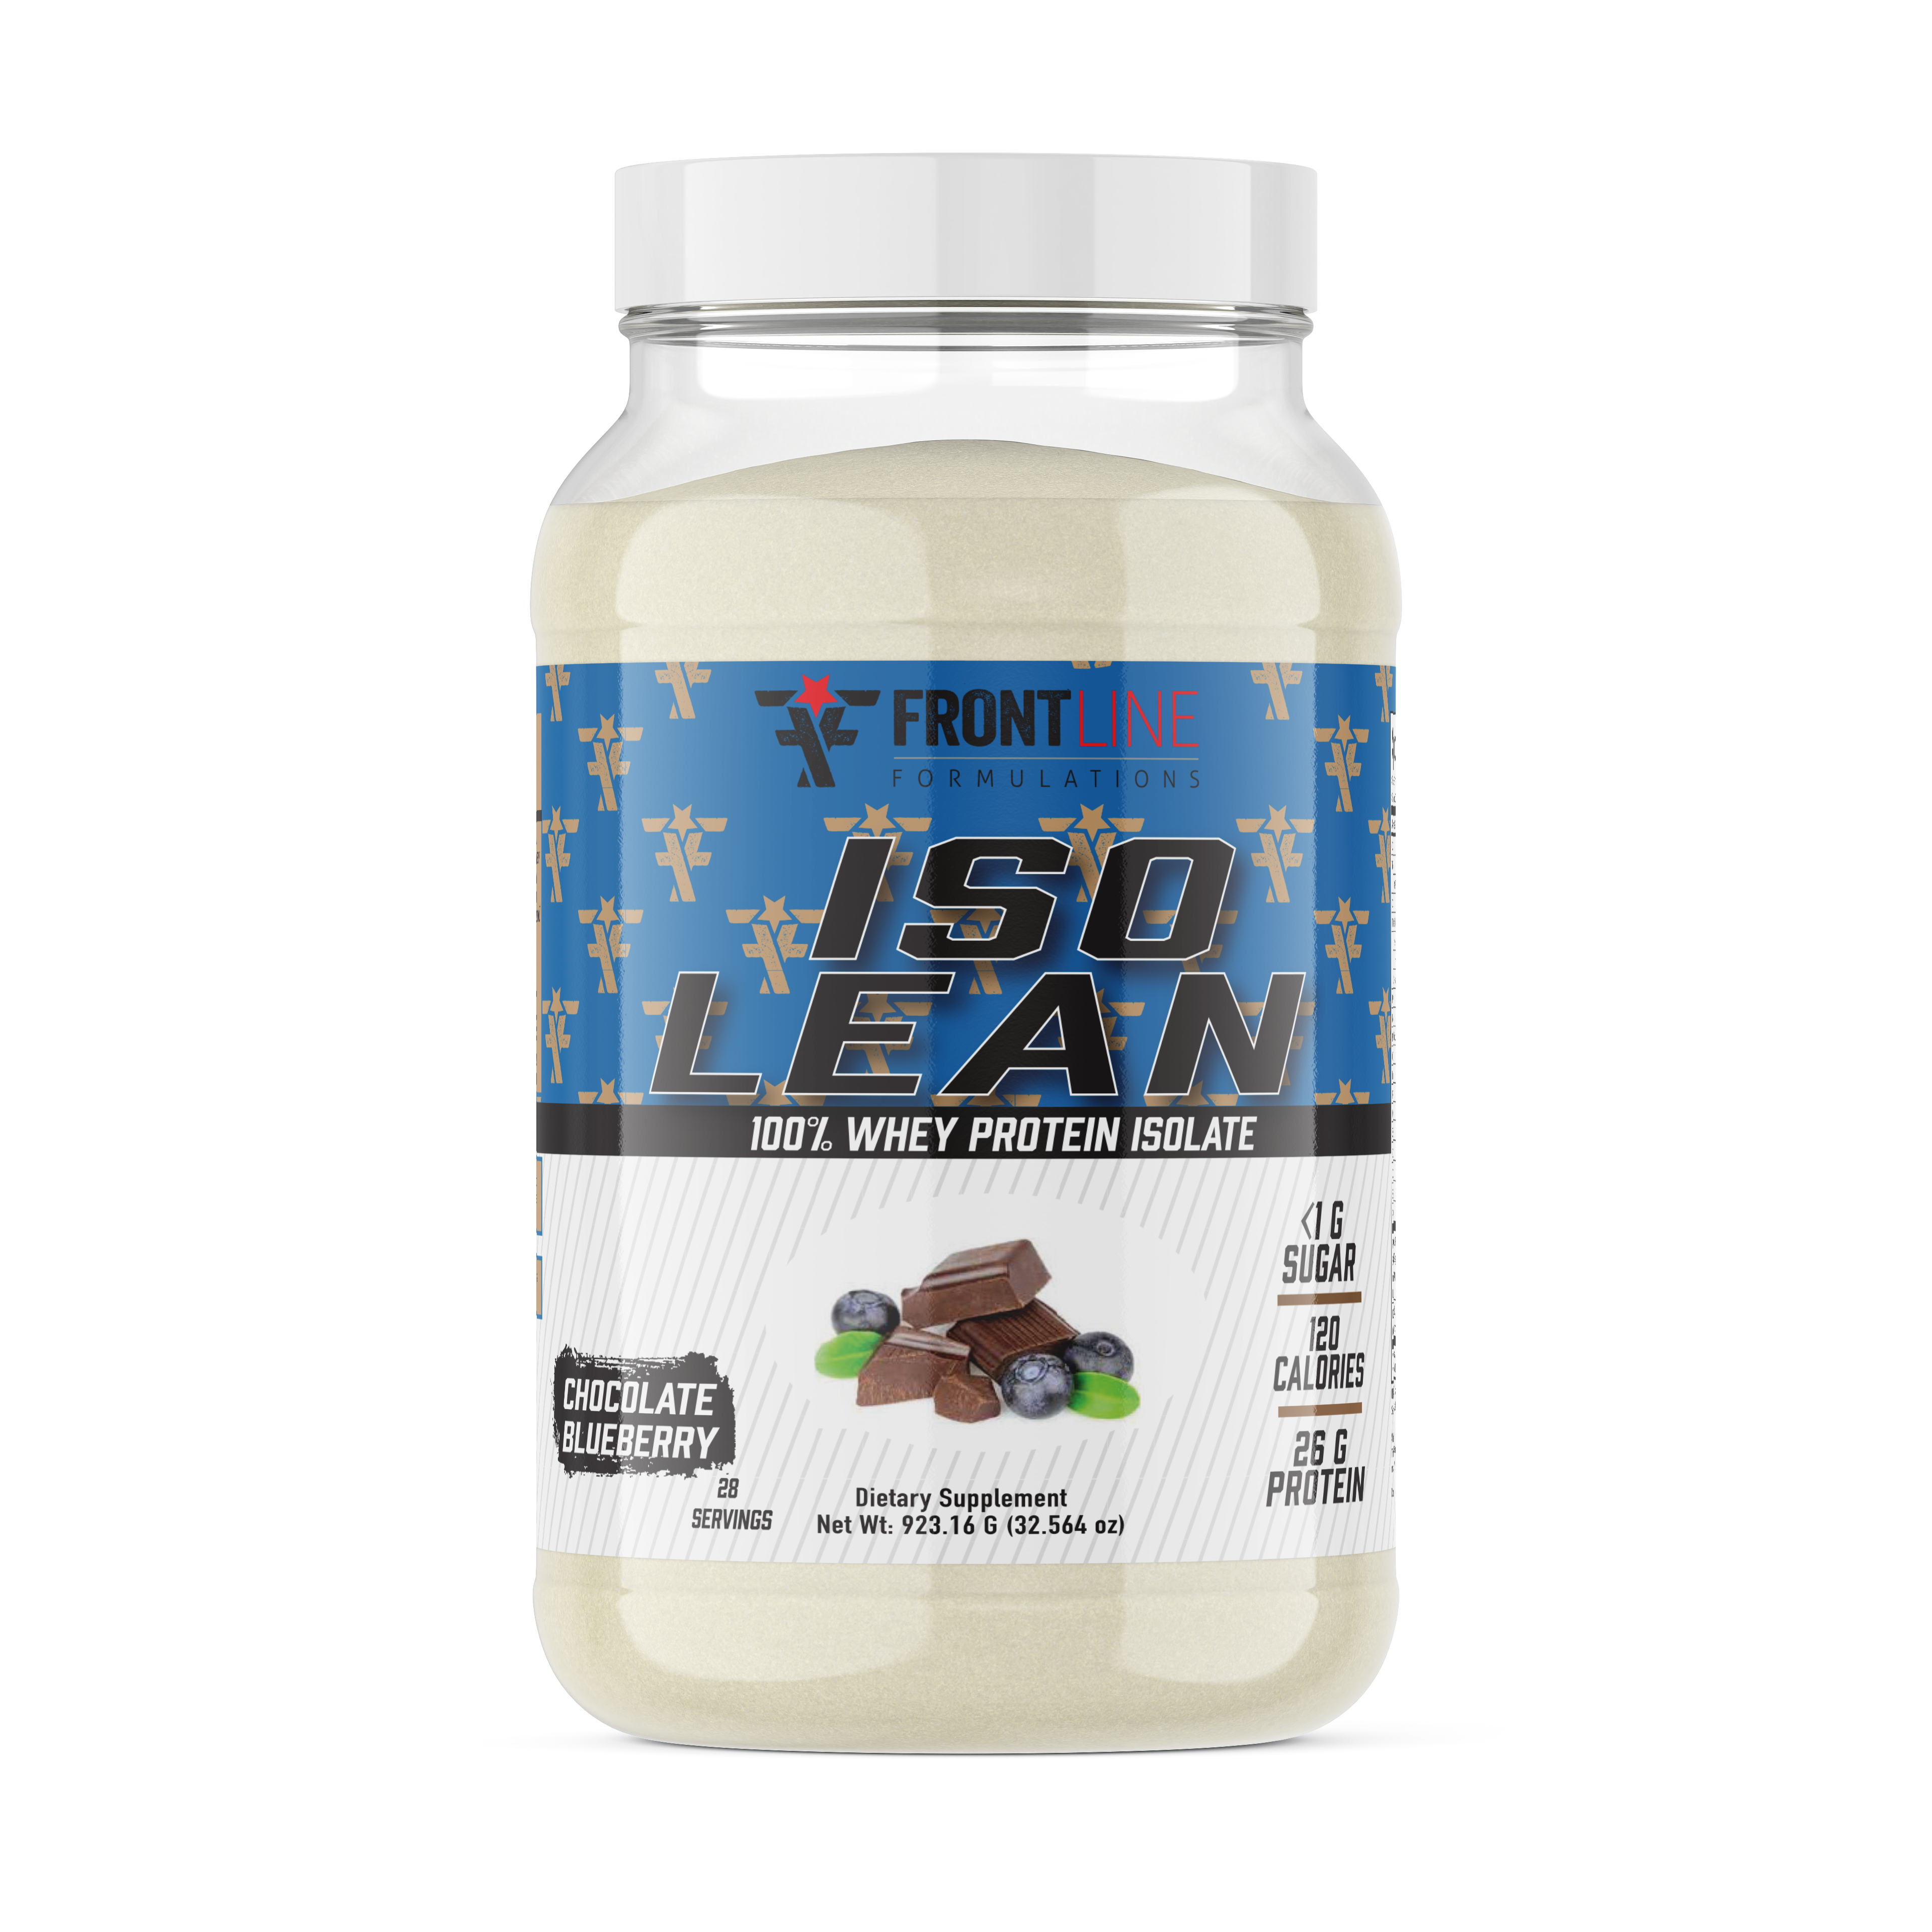 Whey Protein Isolate Ever heard the phrase: "You can't have it all?" Well Frontline wanted to test that with Iso Lean. Let's cut to what you really wanna know! Is it clean? Easily one of the cleanest! Frontline uses Provon®292 SFL Isolate, which reduces t